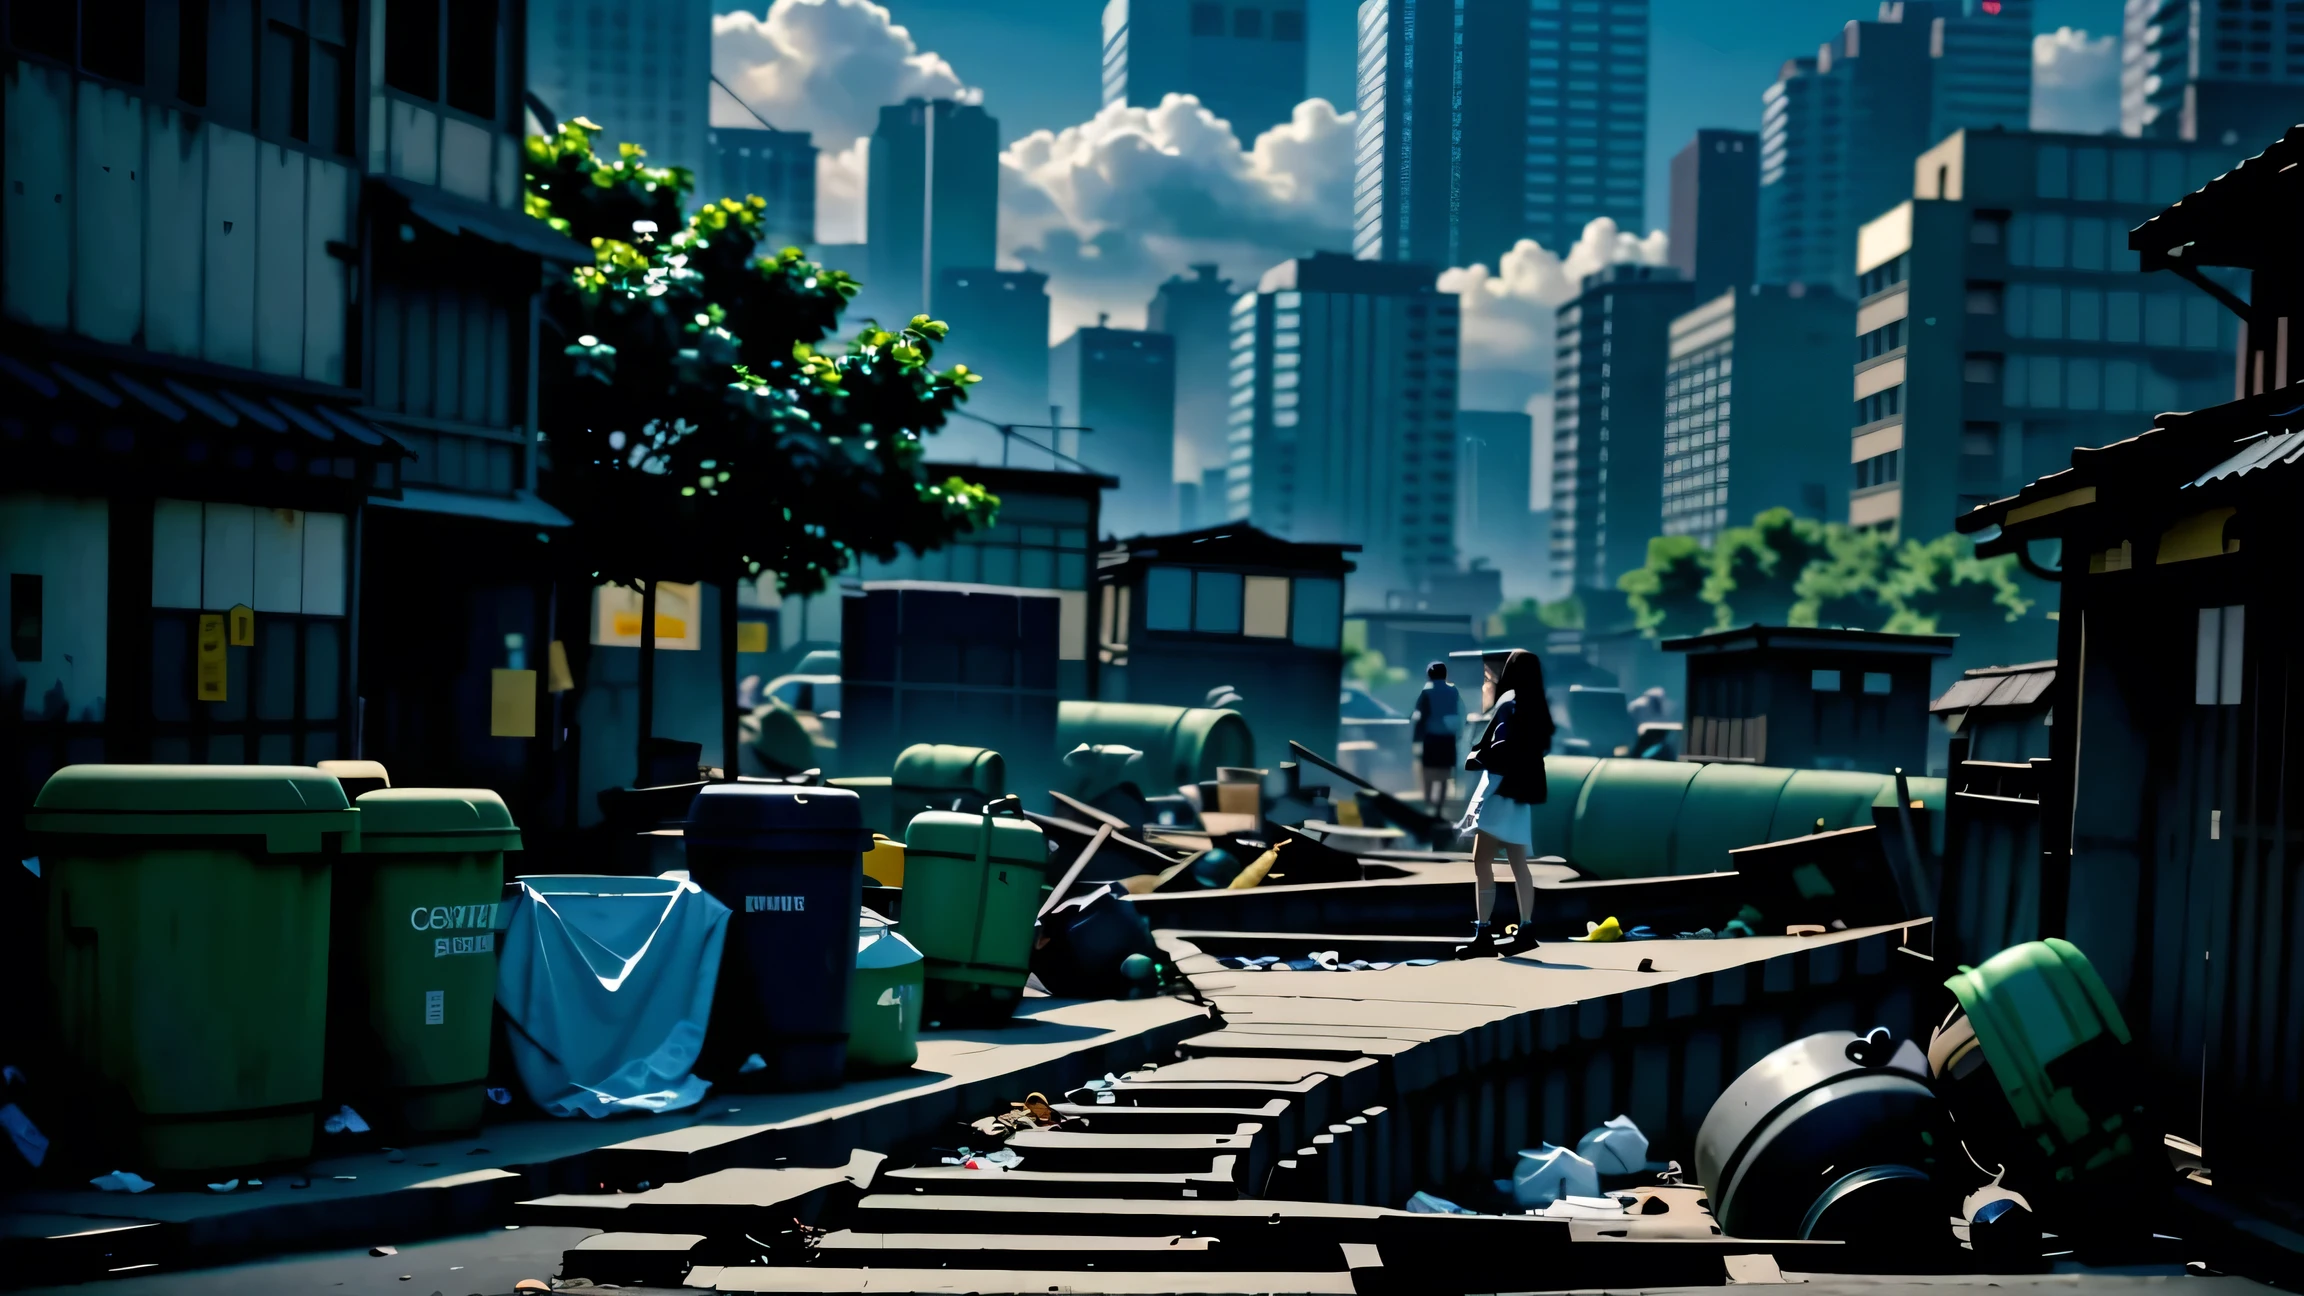 (best quality), masterpiece, extremely detailed CG uniform 8K illustration, high color, 1 girl, Stand at front, Portrait of a collapsed area full of garbage, trash cans, garbage, junk, plastic bag, Dirty, Slum City, poverty,  Dim light, Epic, Cityscape, dawn, Clear sky, tree, railway, Cable, Dramatic, River